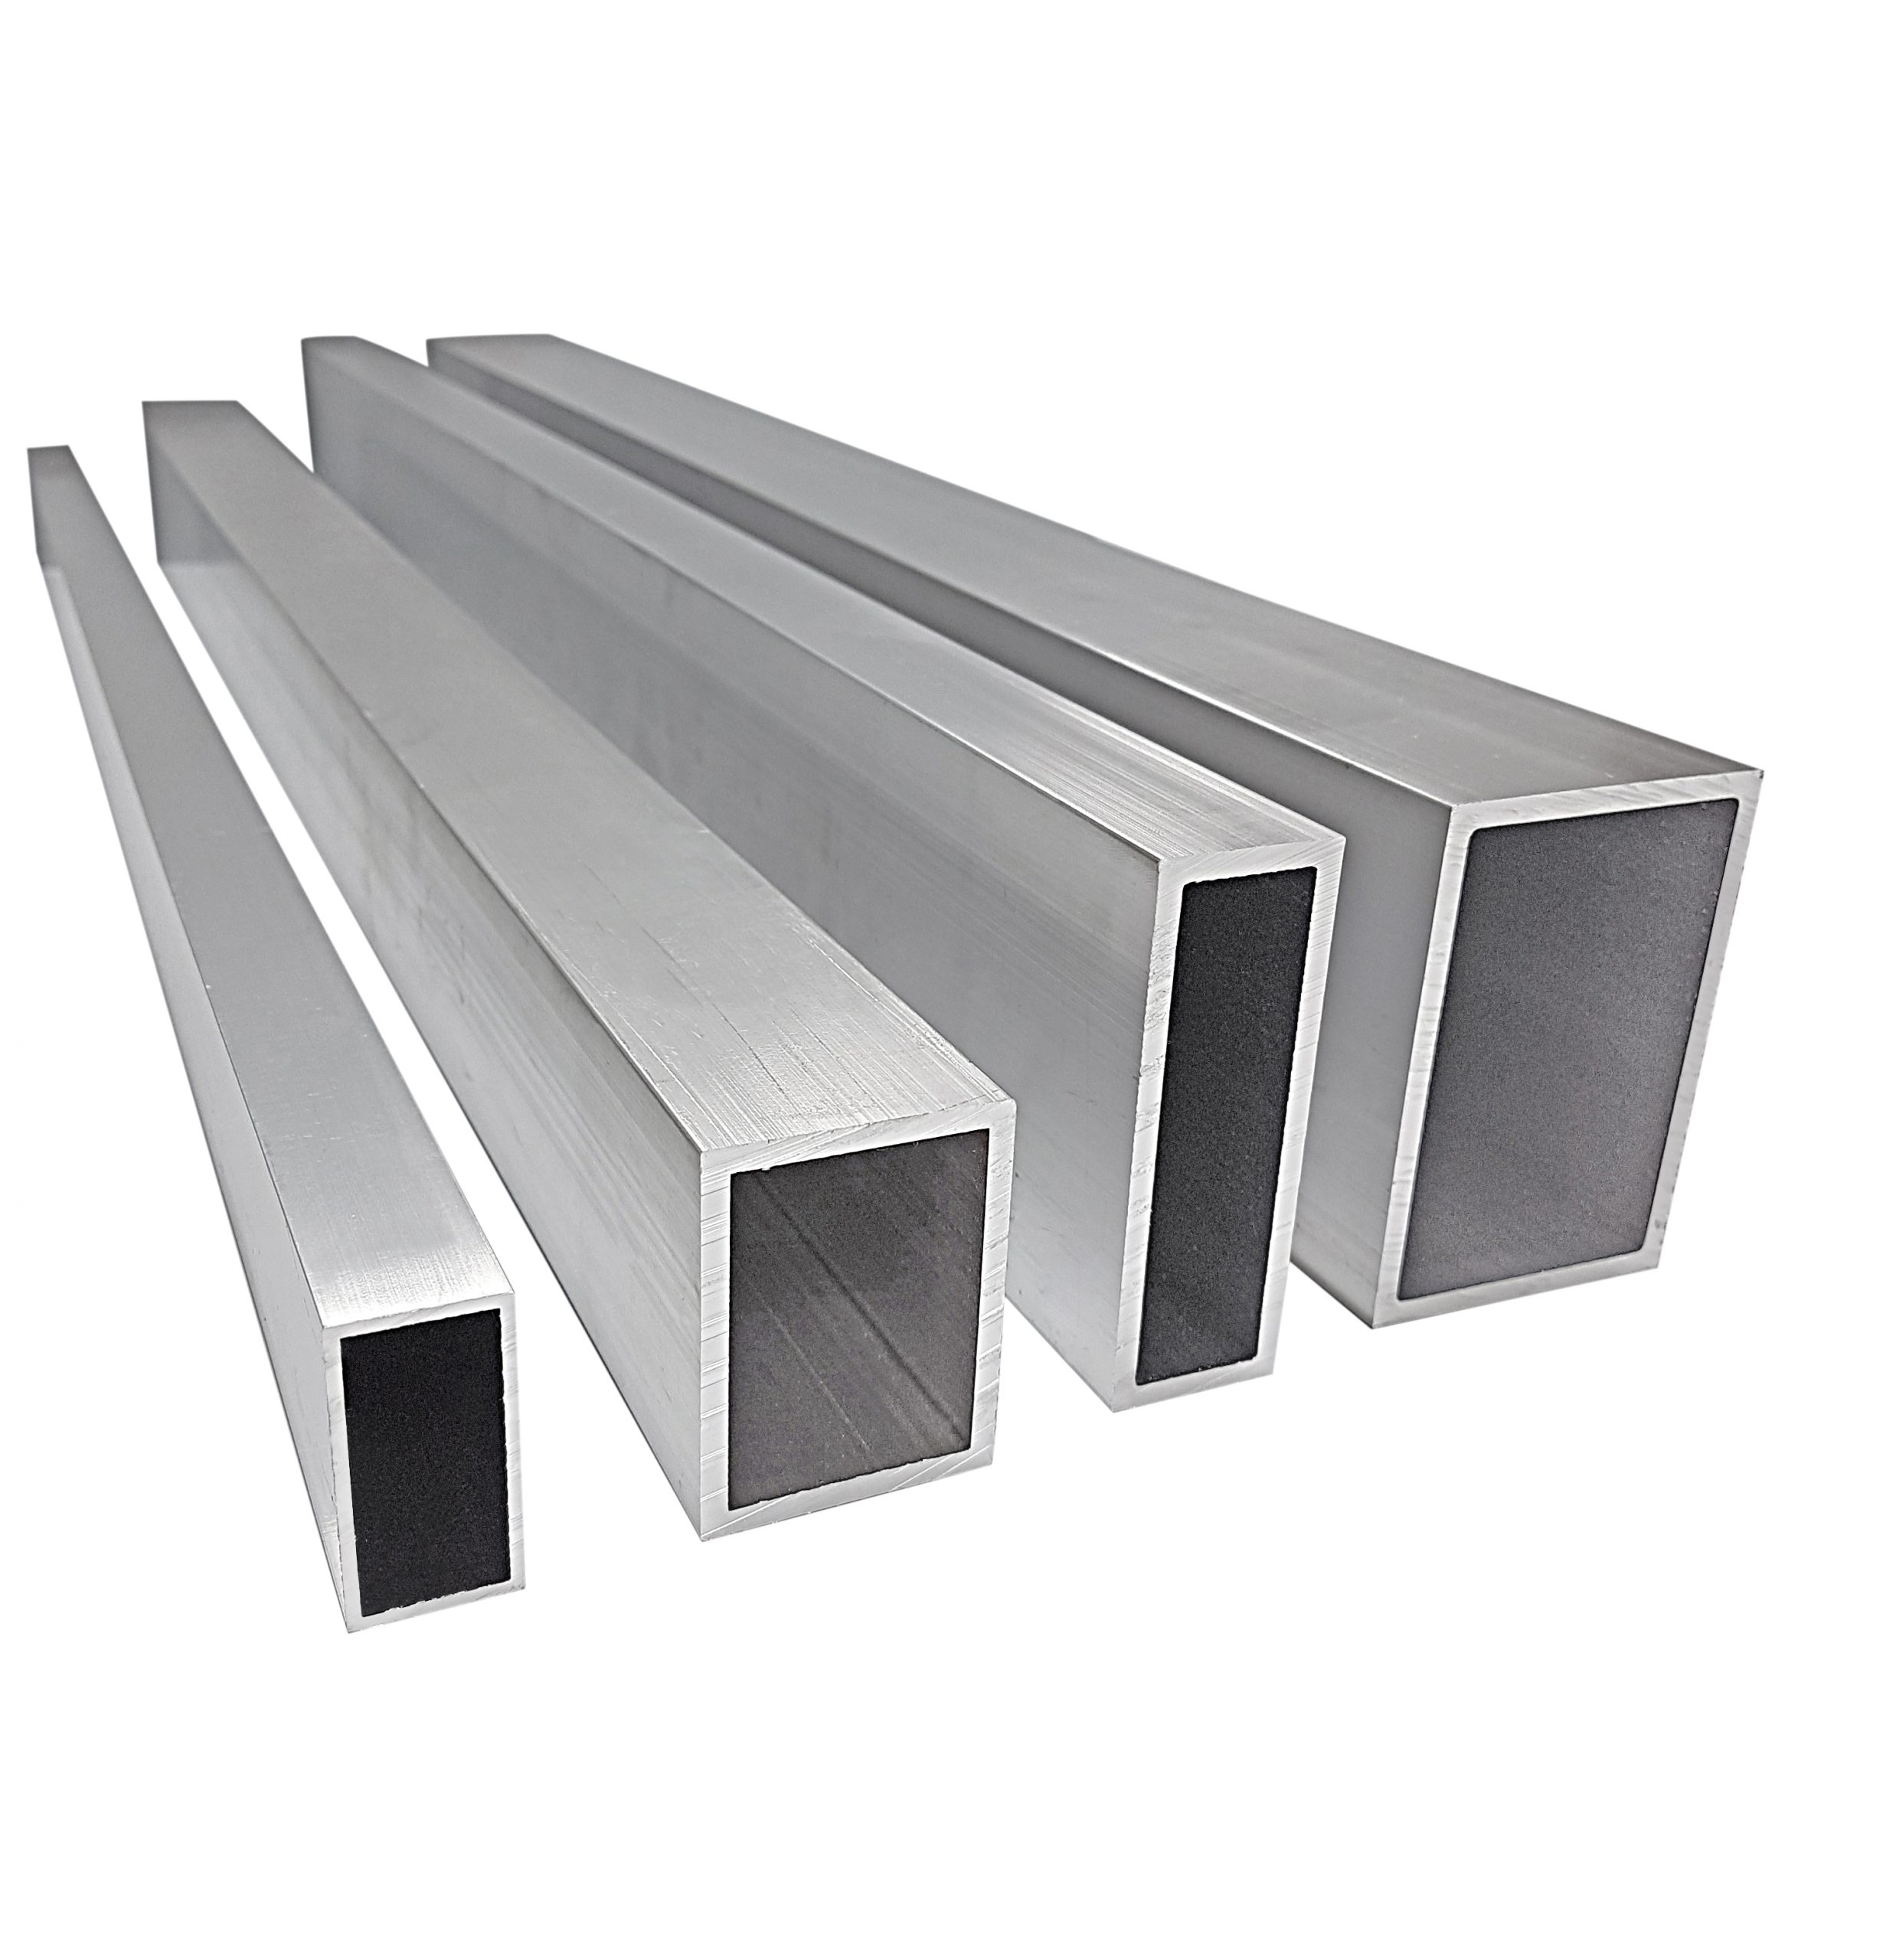 https://www.1stchoicemetals.co.uk/wp-content/uploads/2022/03/Rectangular-box-section-scaled.jpg